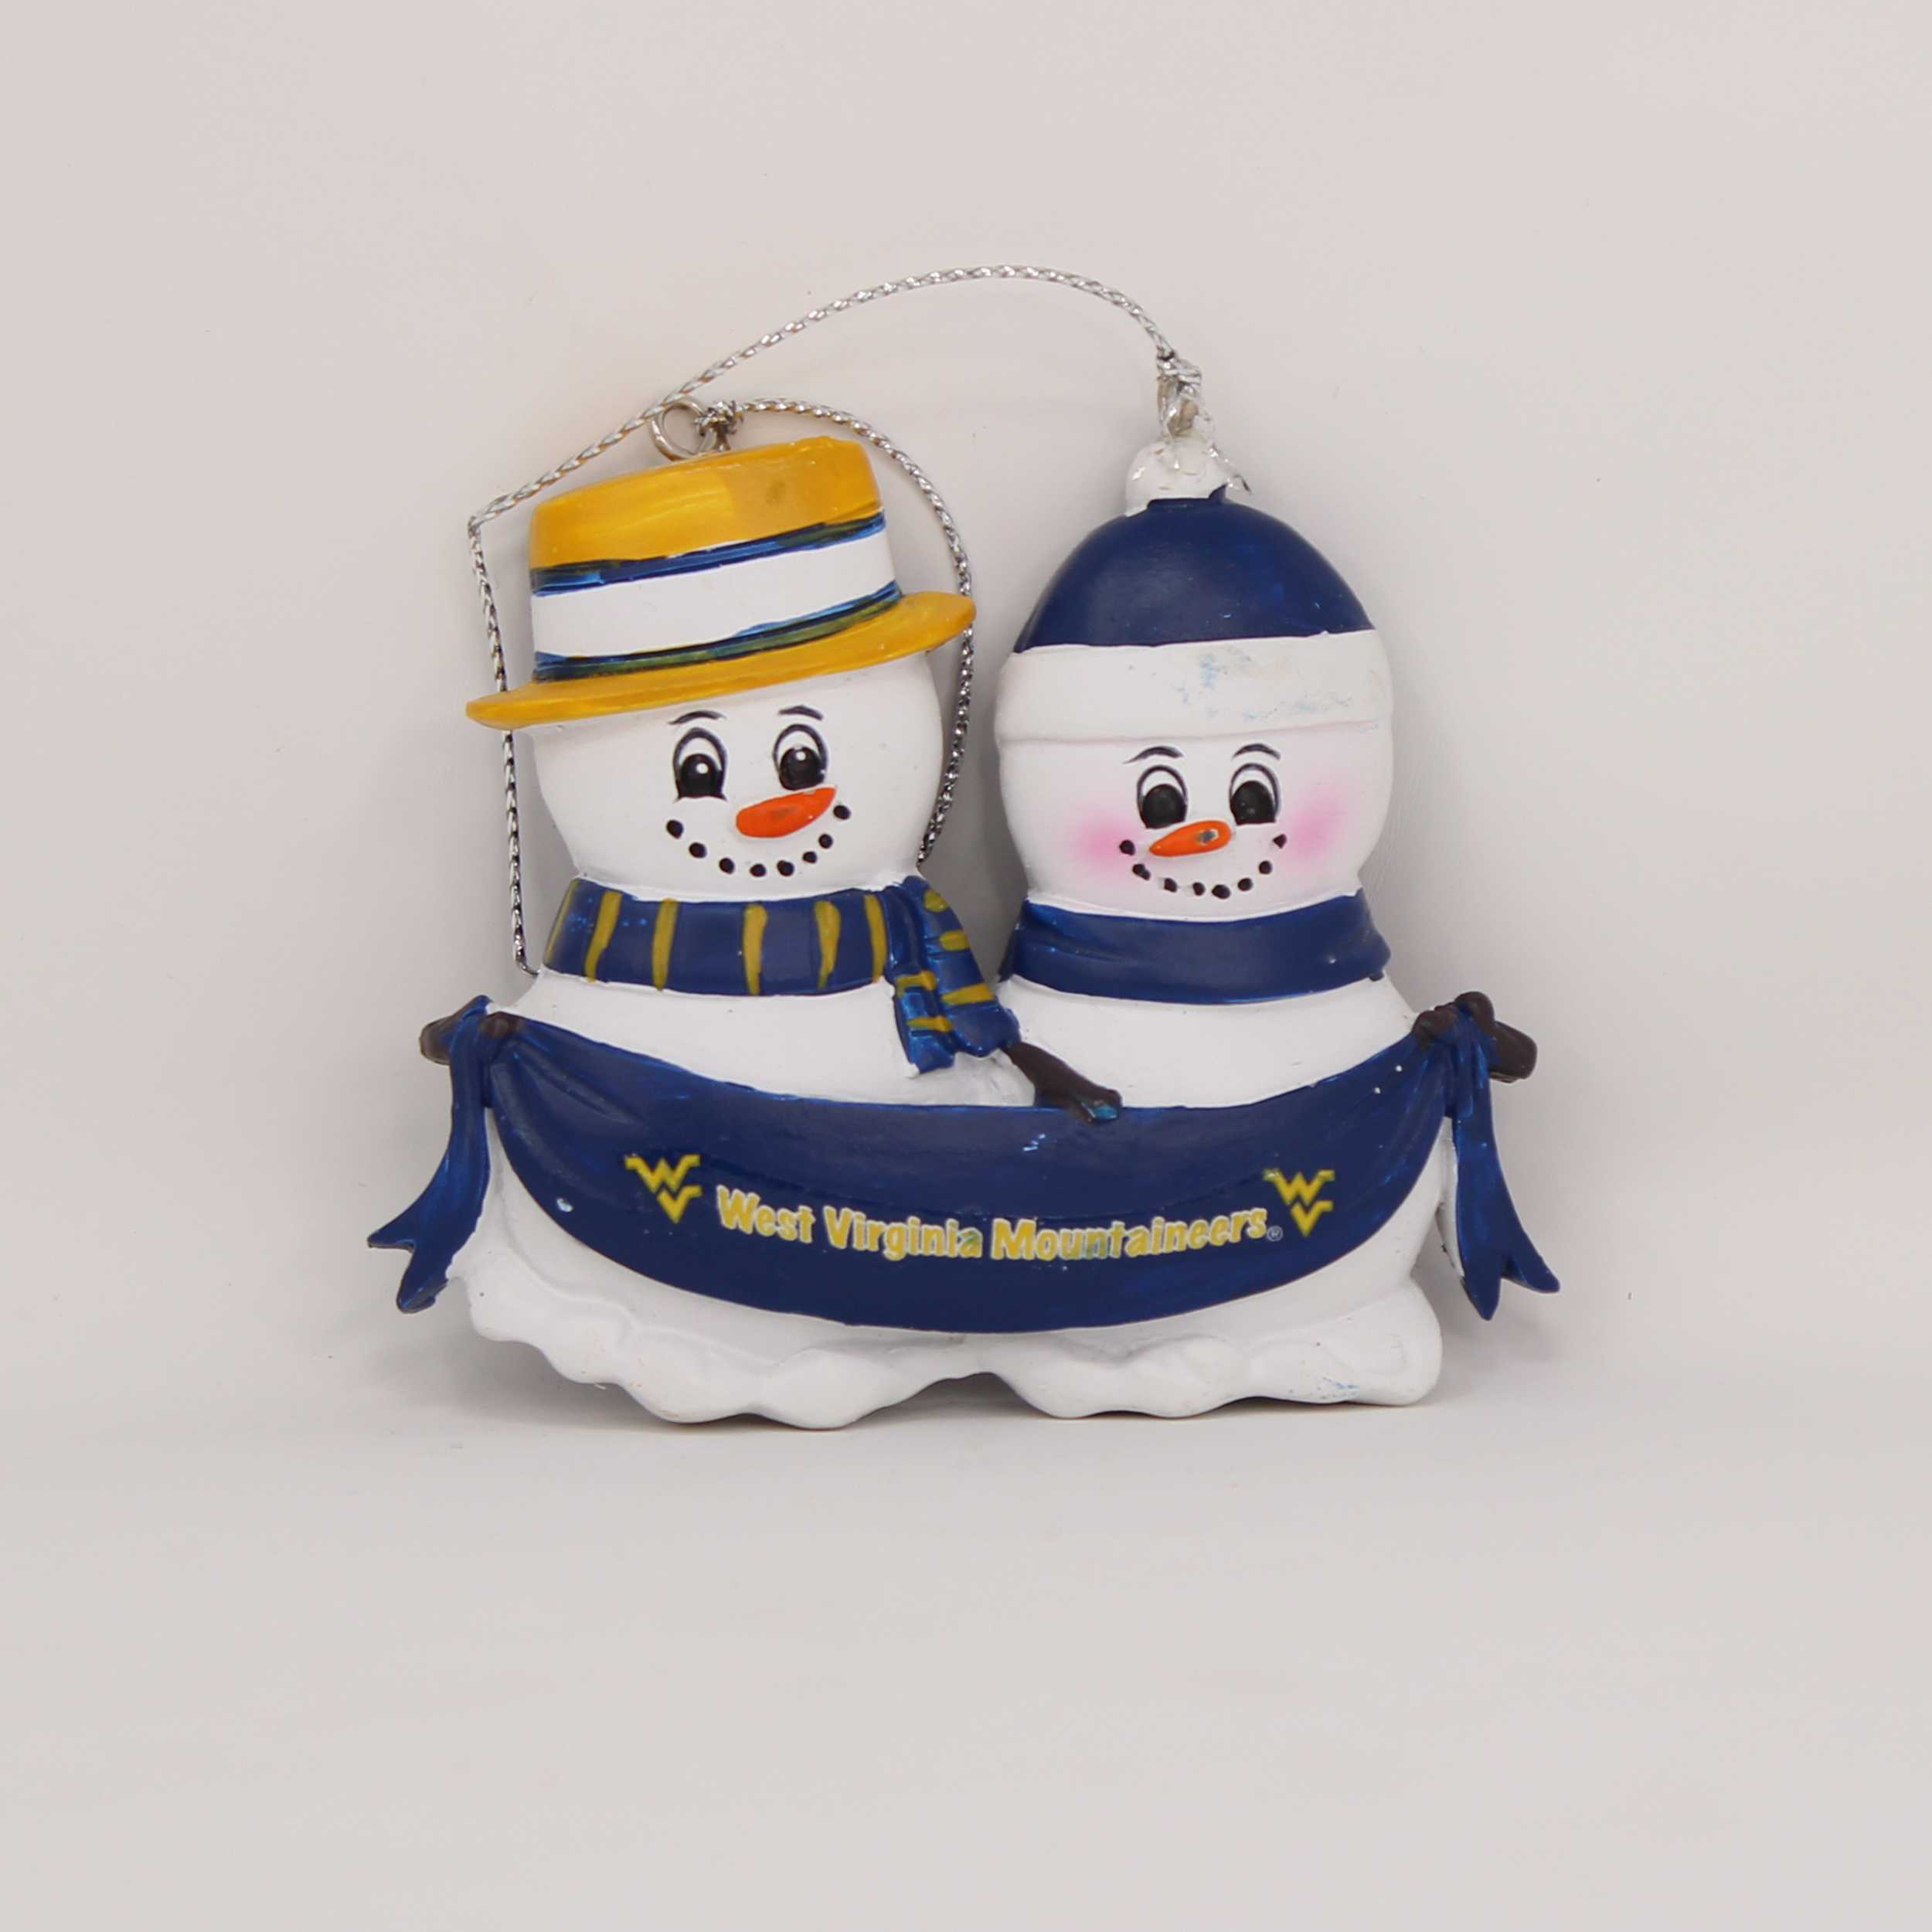 Personalized Family Ornament West Virginia Mountaineers